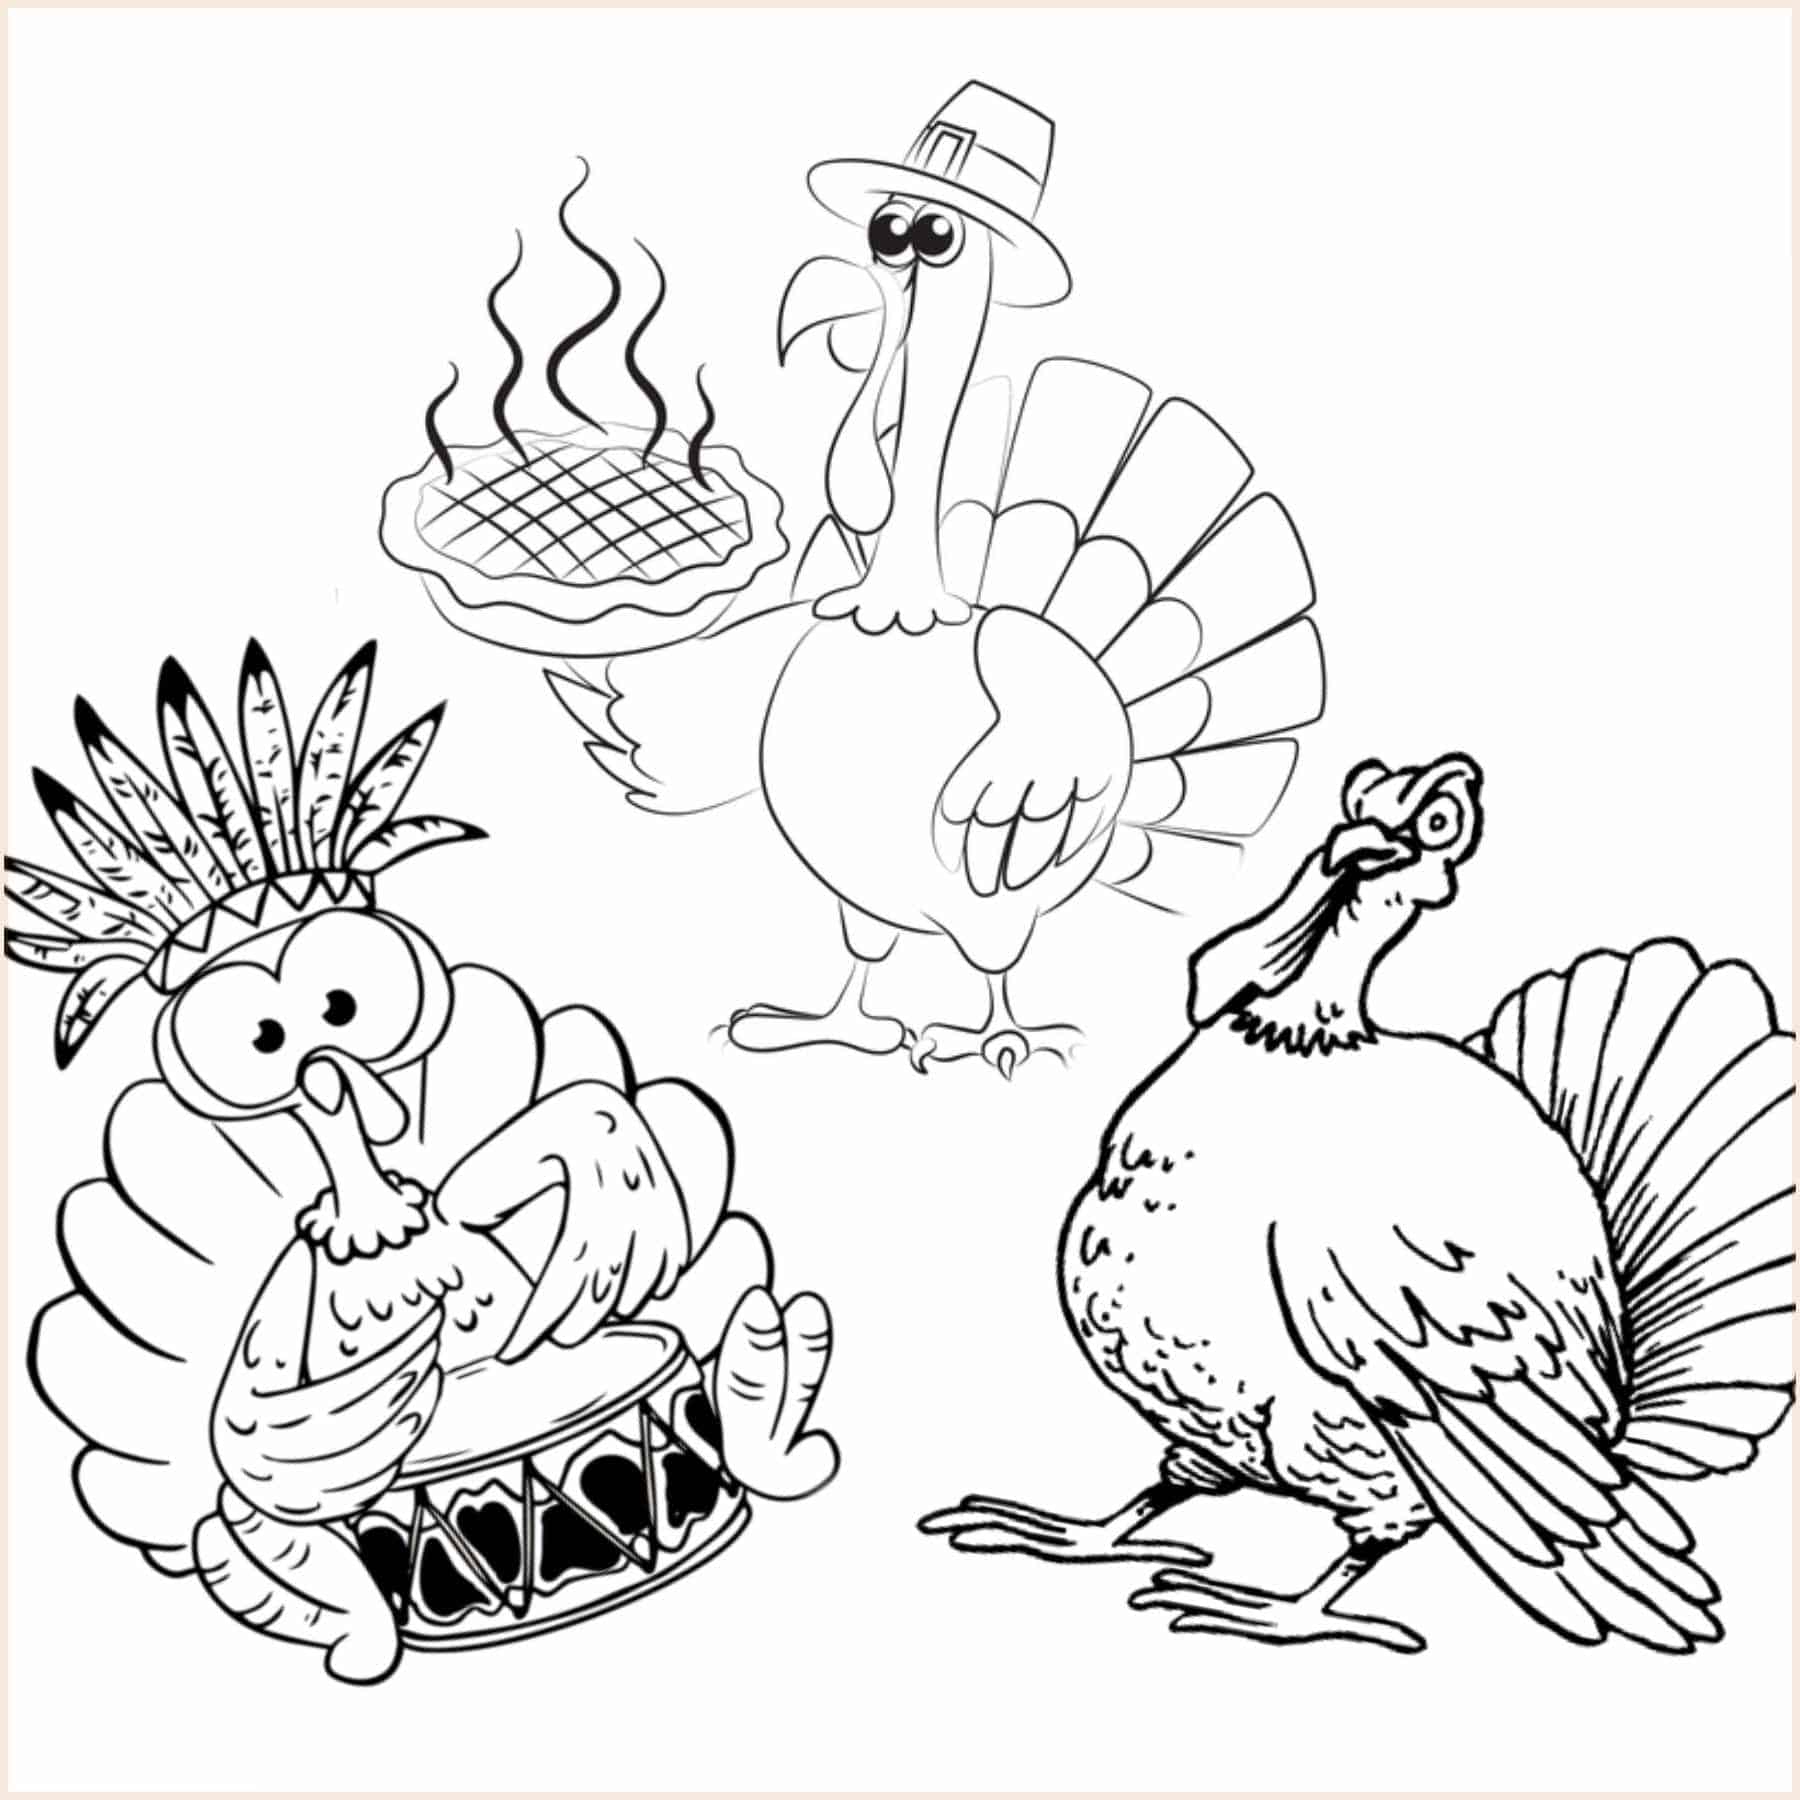 51 Adorable Thanksgiving Turkey Coloring Pages (For Free!)